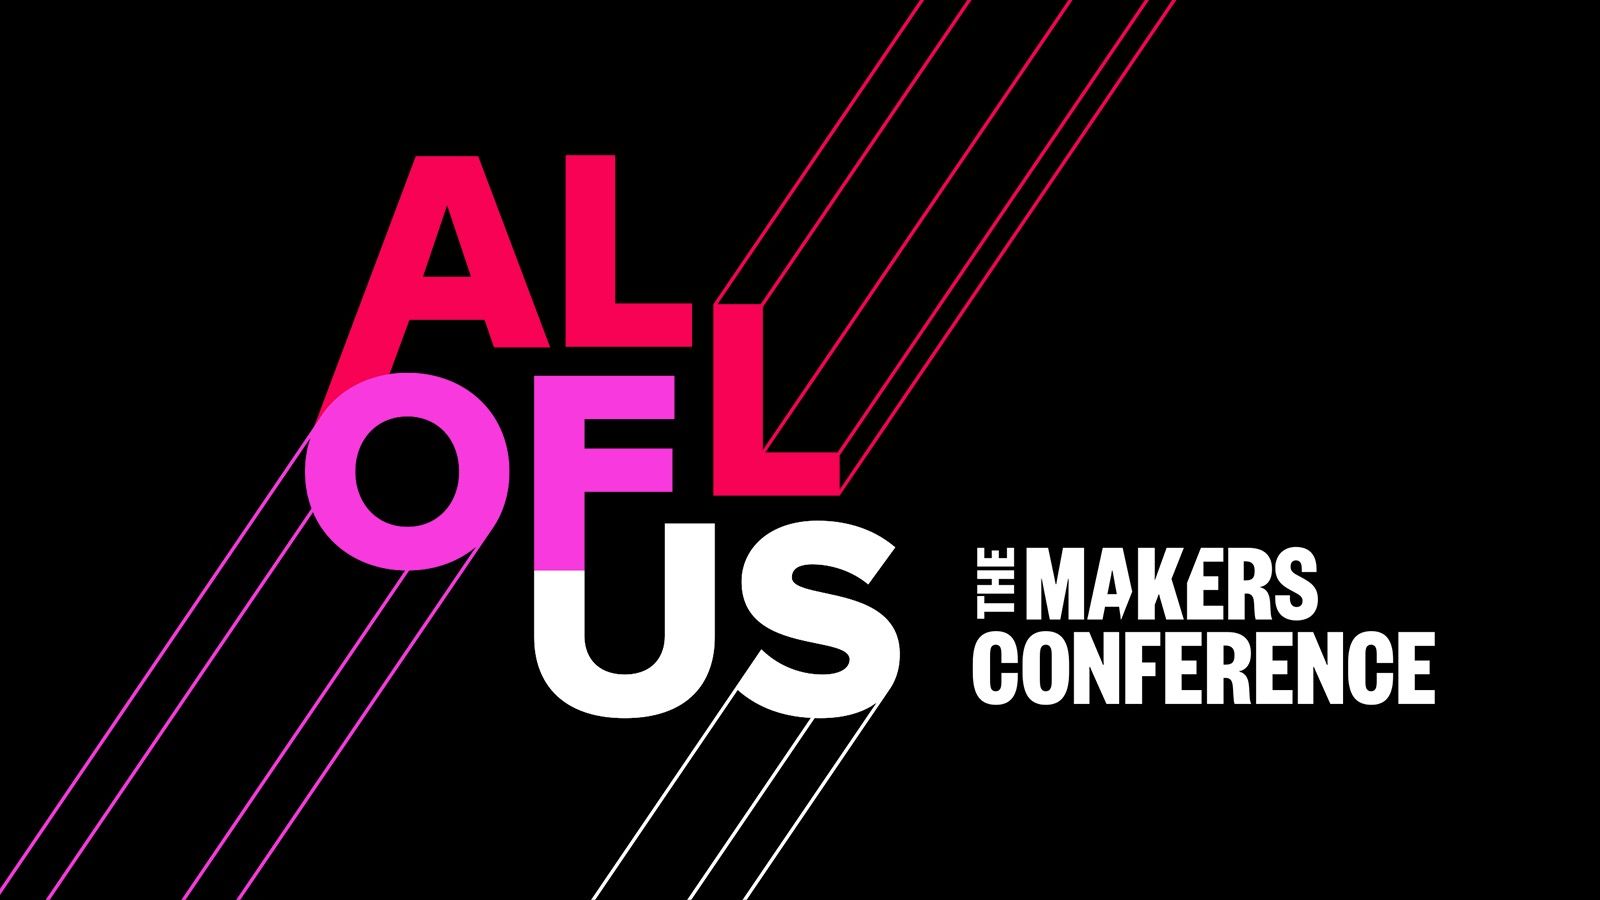 The Makers Conference